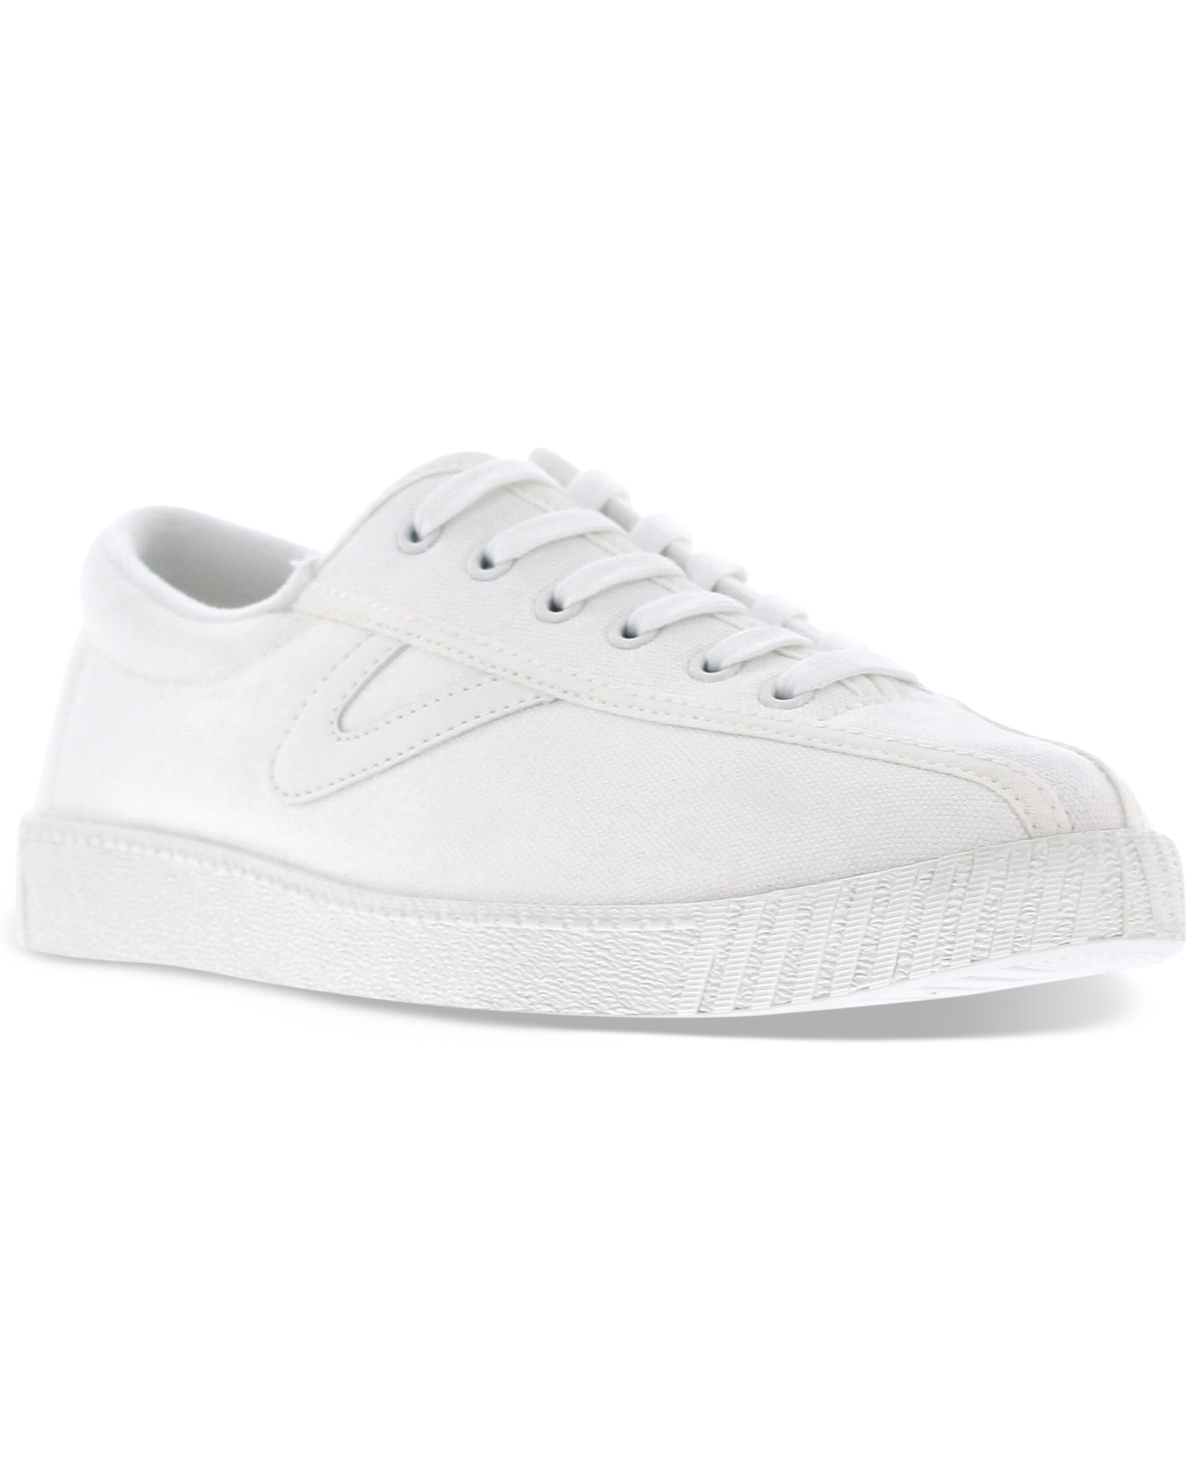 Men's Nylite Plus Canvas Casual Sneakers from Finish Line - White/Green